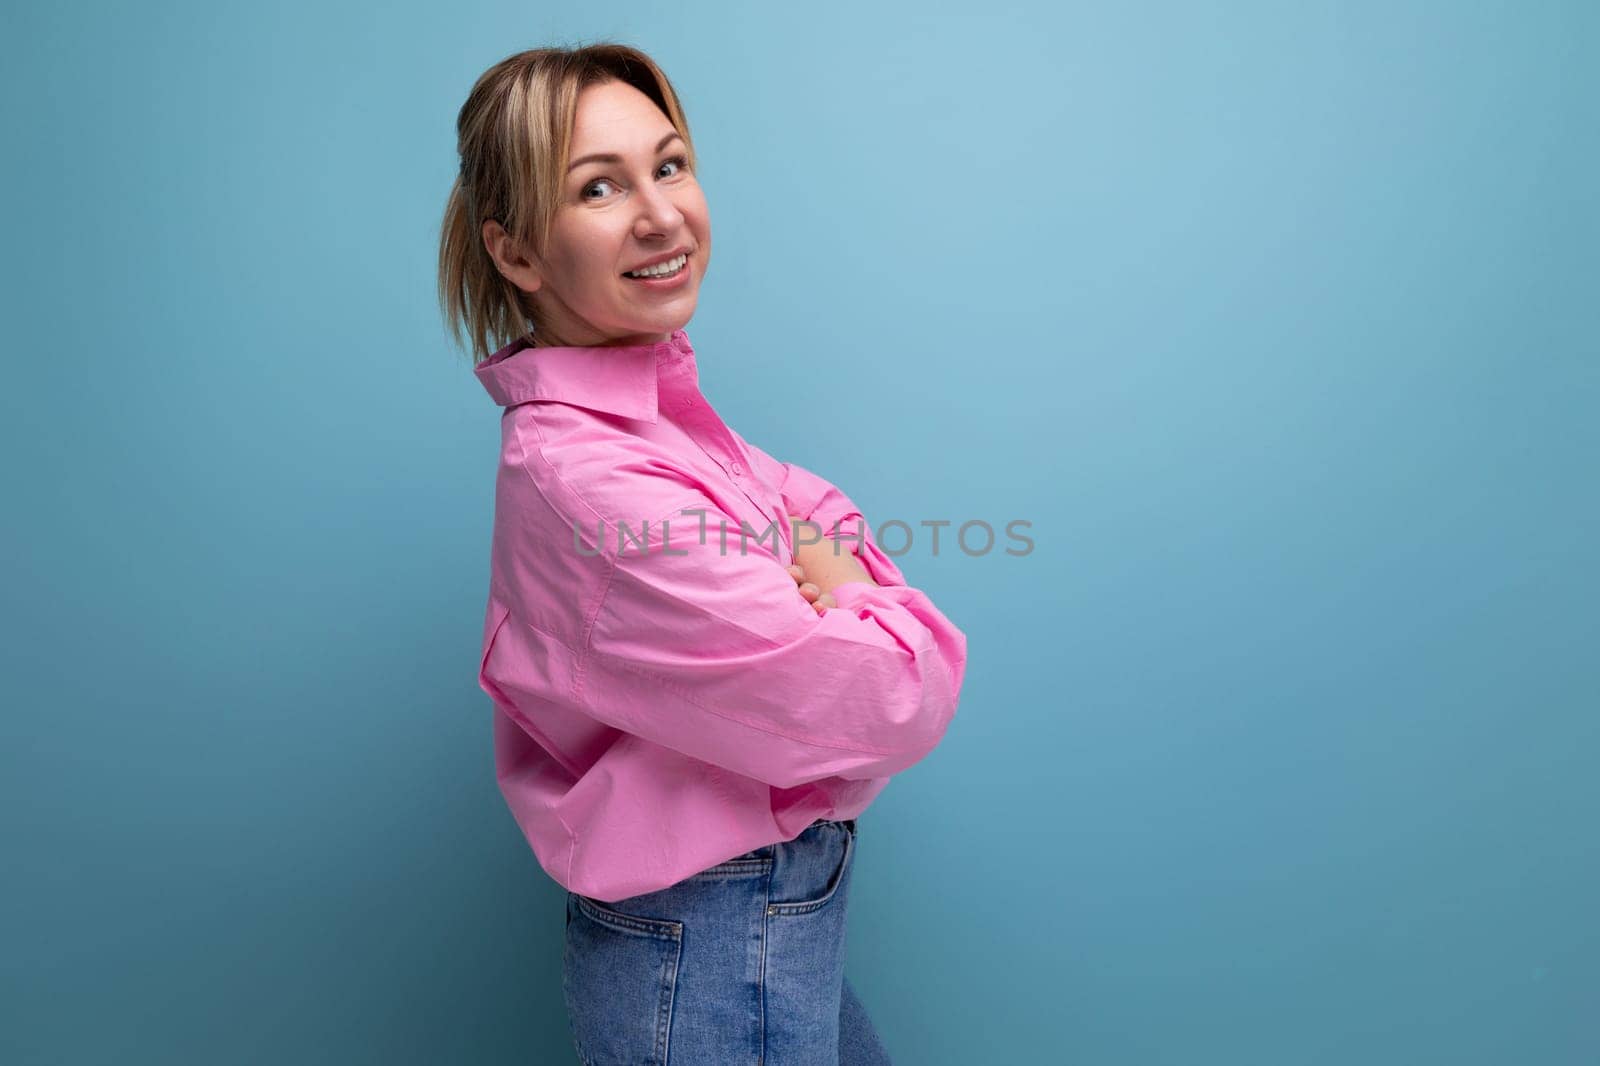 young energetic European blond leader woman with ponytail dressed in a pink blouse on the background with copy space by TRMK